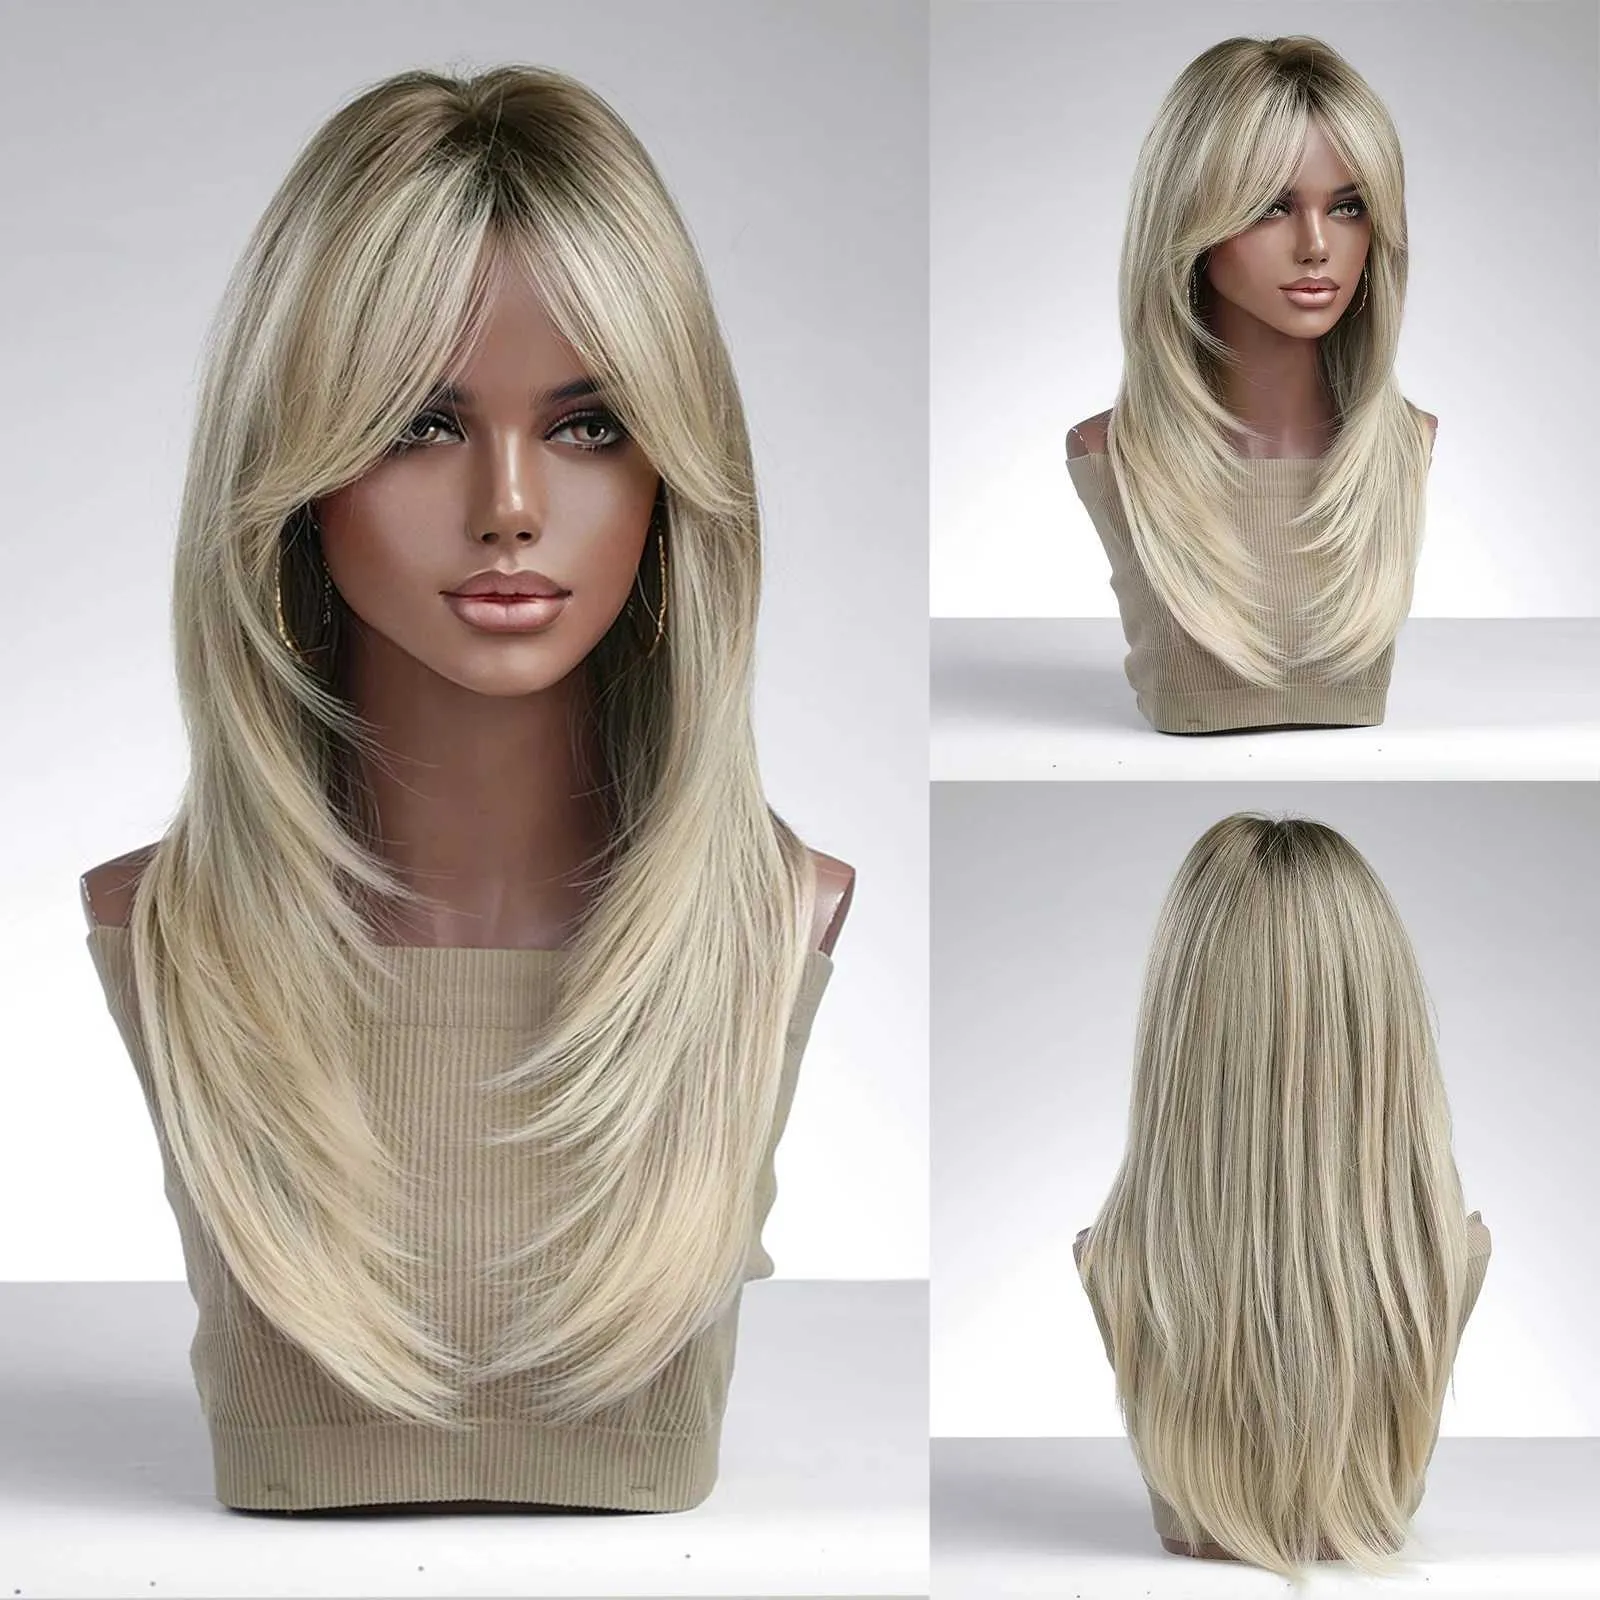 Hair Wigs La Sylphide Blonde Wig with Bangs Long Straight Good Quality Synthetic for Women Daily Natural Heat Resistant 231121